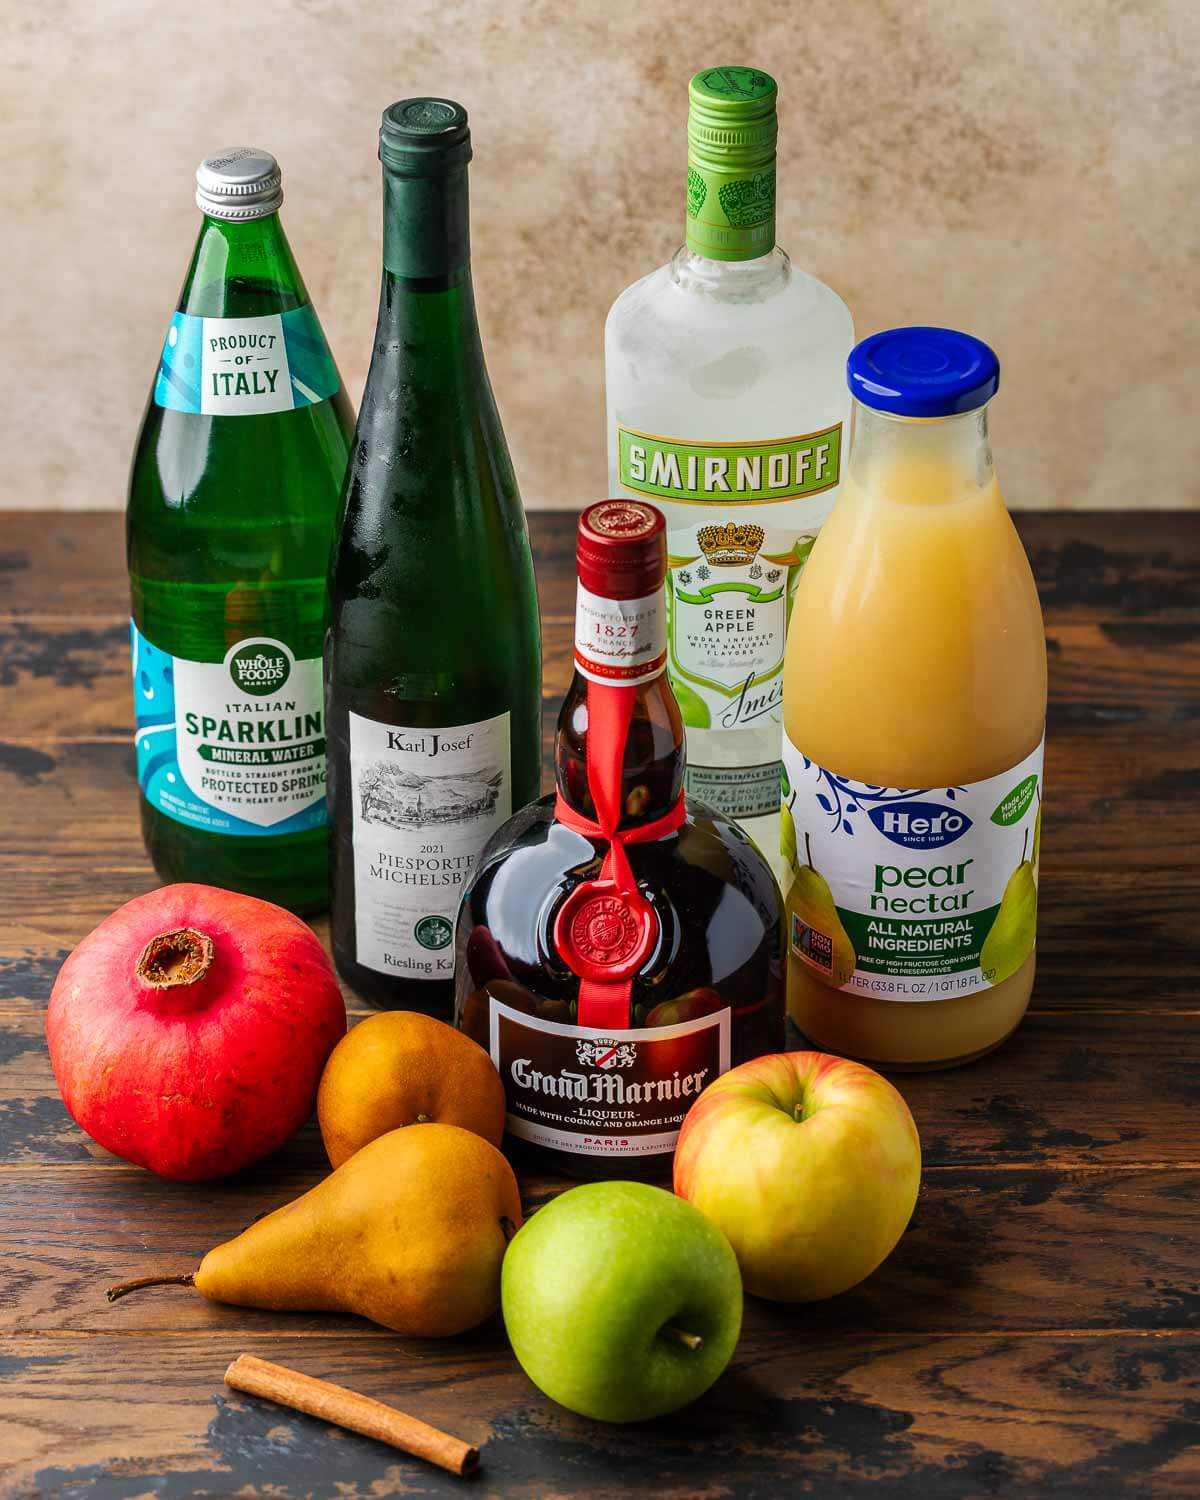 Ingredients shown: sparkling water, reisling, apple vodka, pear nectar, Grand Marnier, pomegranate, pears, apples, and a cinnamon stick.